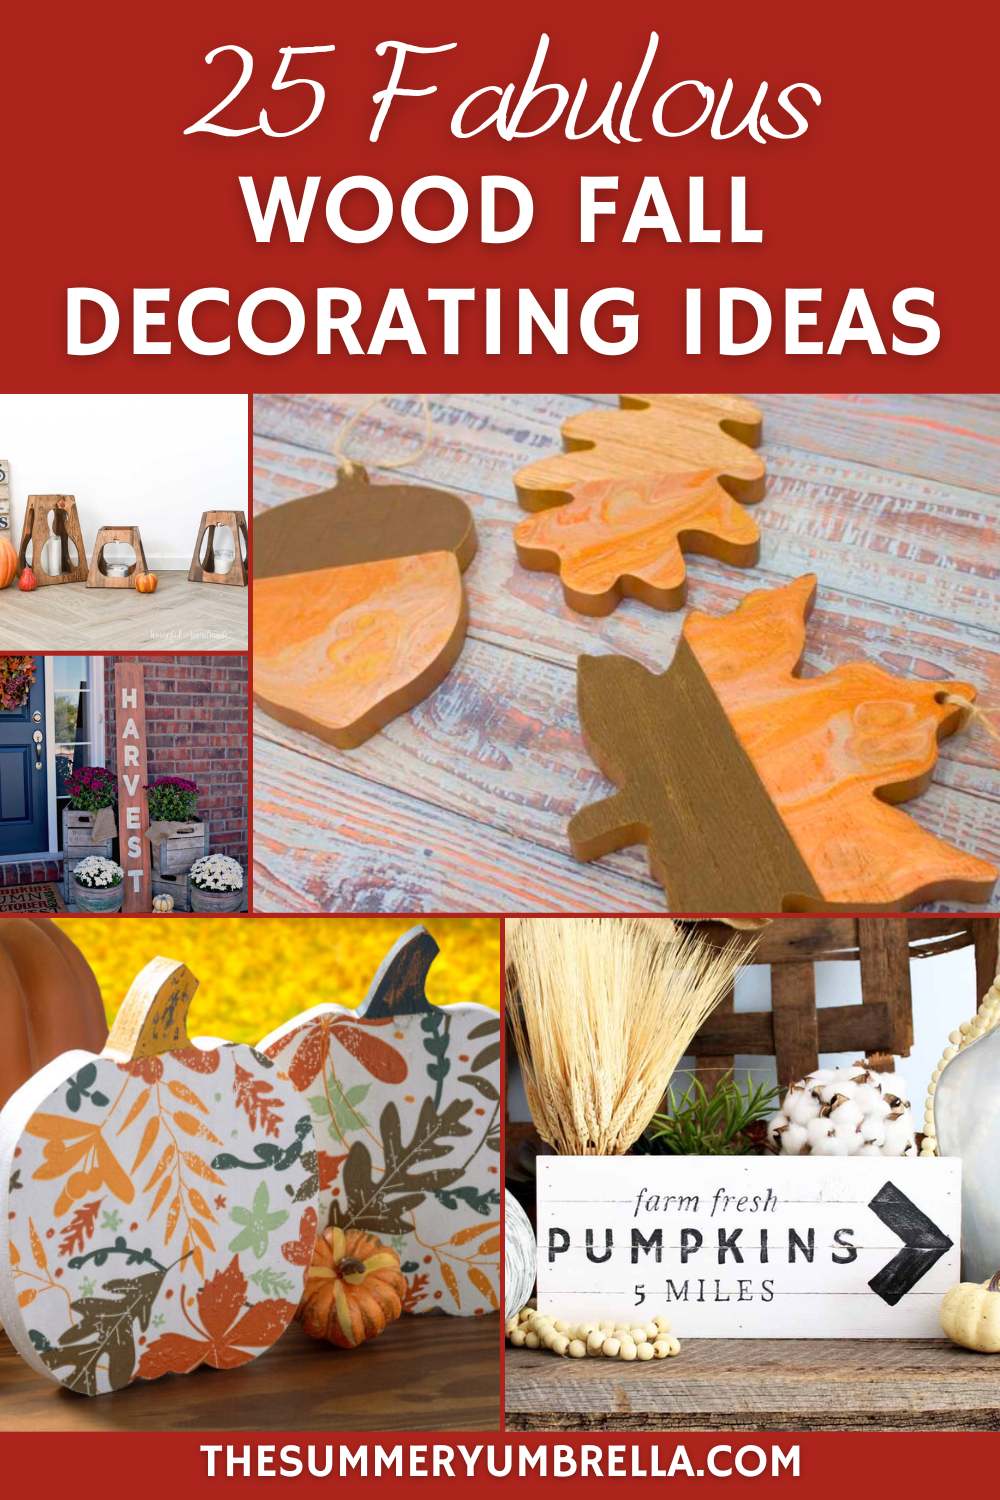 Craft a cozy home atmosphere with 25 stunning DIY wood decor ideas for a charming fall touch. Discover creative inspirations that invite the warmth and beauty of autumn into your living space. Elevate your home's ambiance with these inventive and simple wood-based creations for a cozy, welcoming feel this season.